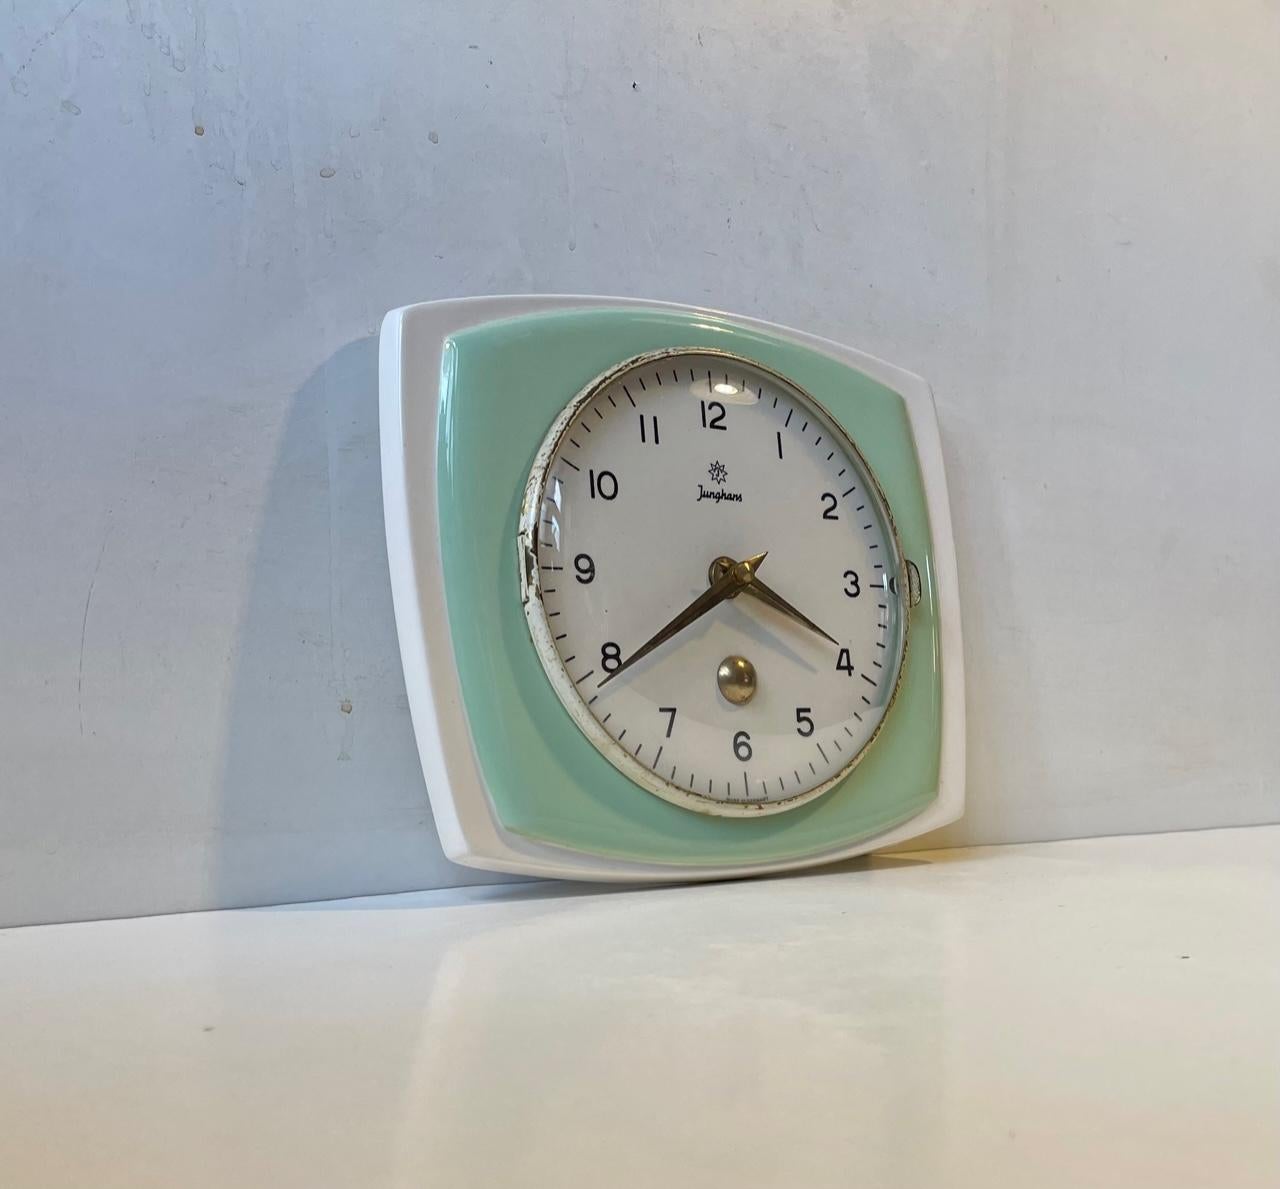 A midcentury German porcelain wall clock decorated with pastel green glaze. It features a slightly concave glass front that can be opened sideways. Made by Junghans in West Germany circa 1950-60. It is operated by a quartz movement. Measurements: